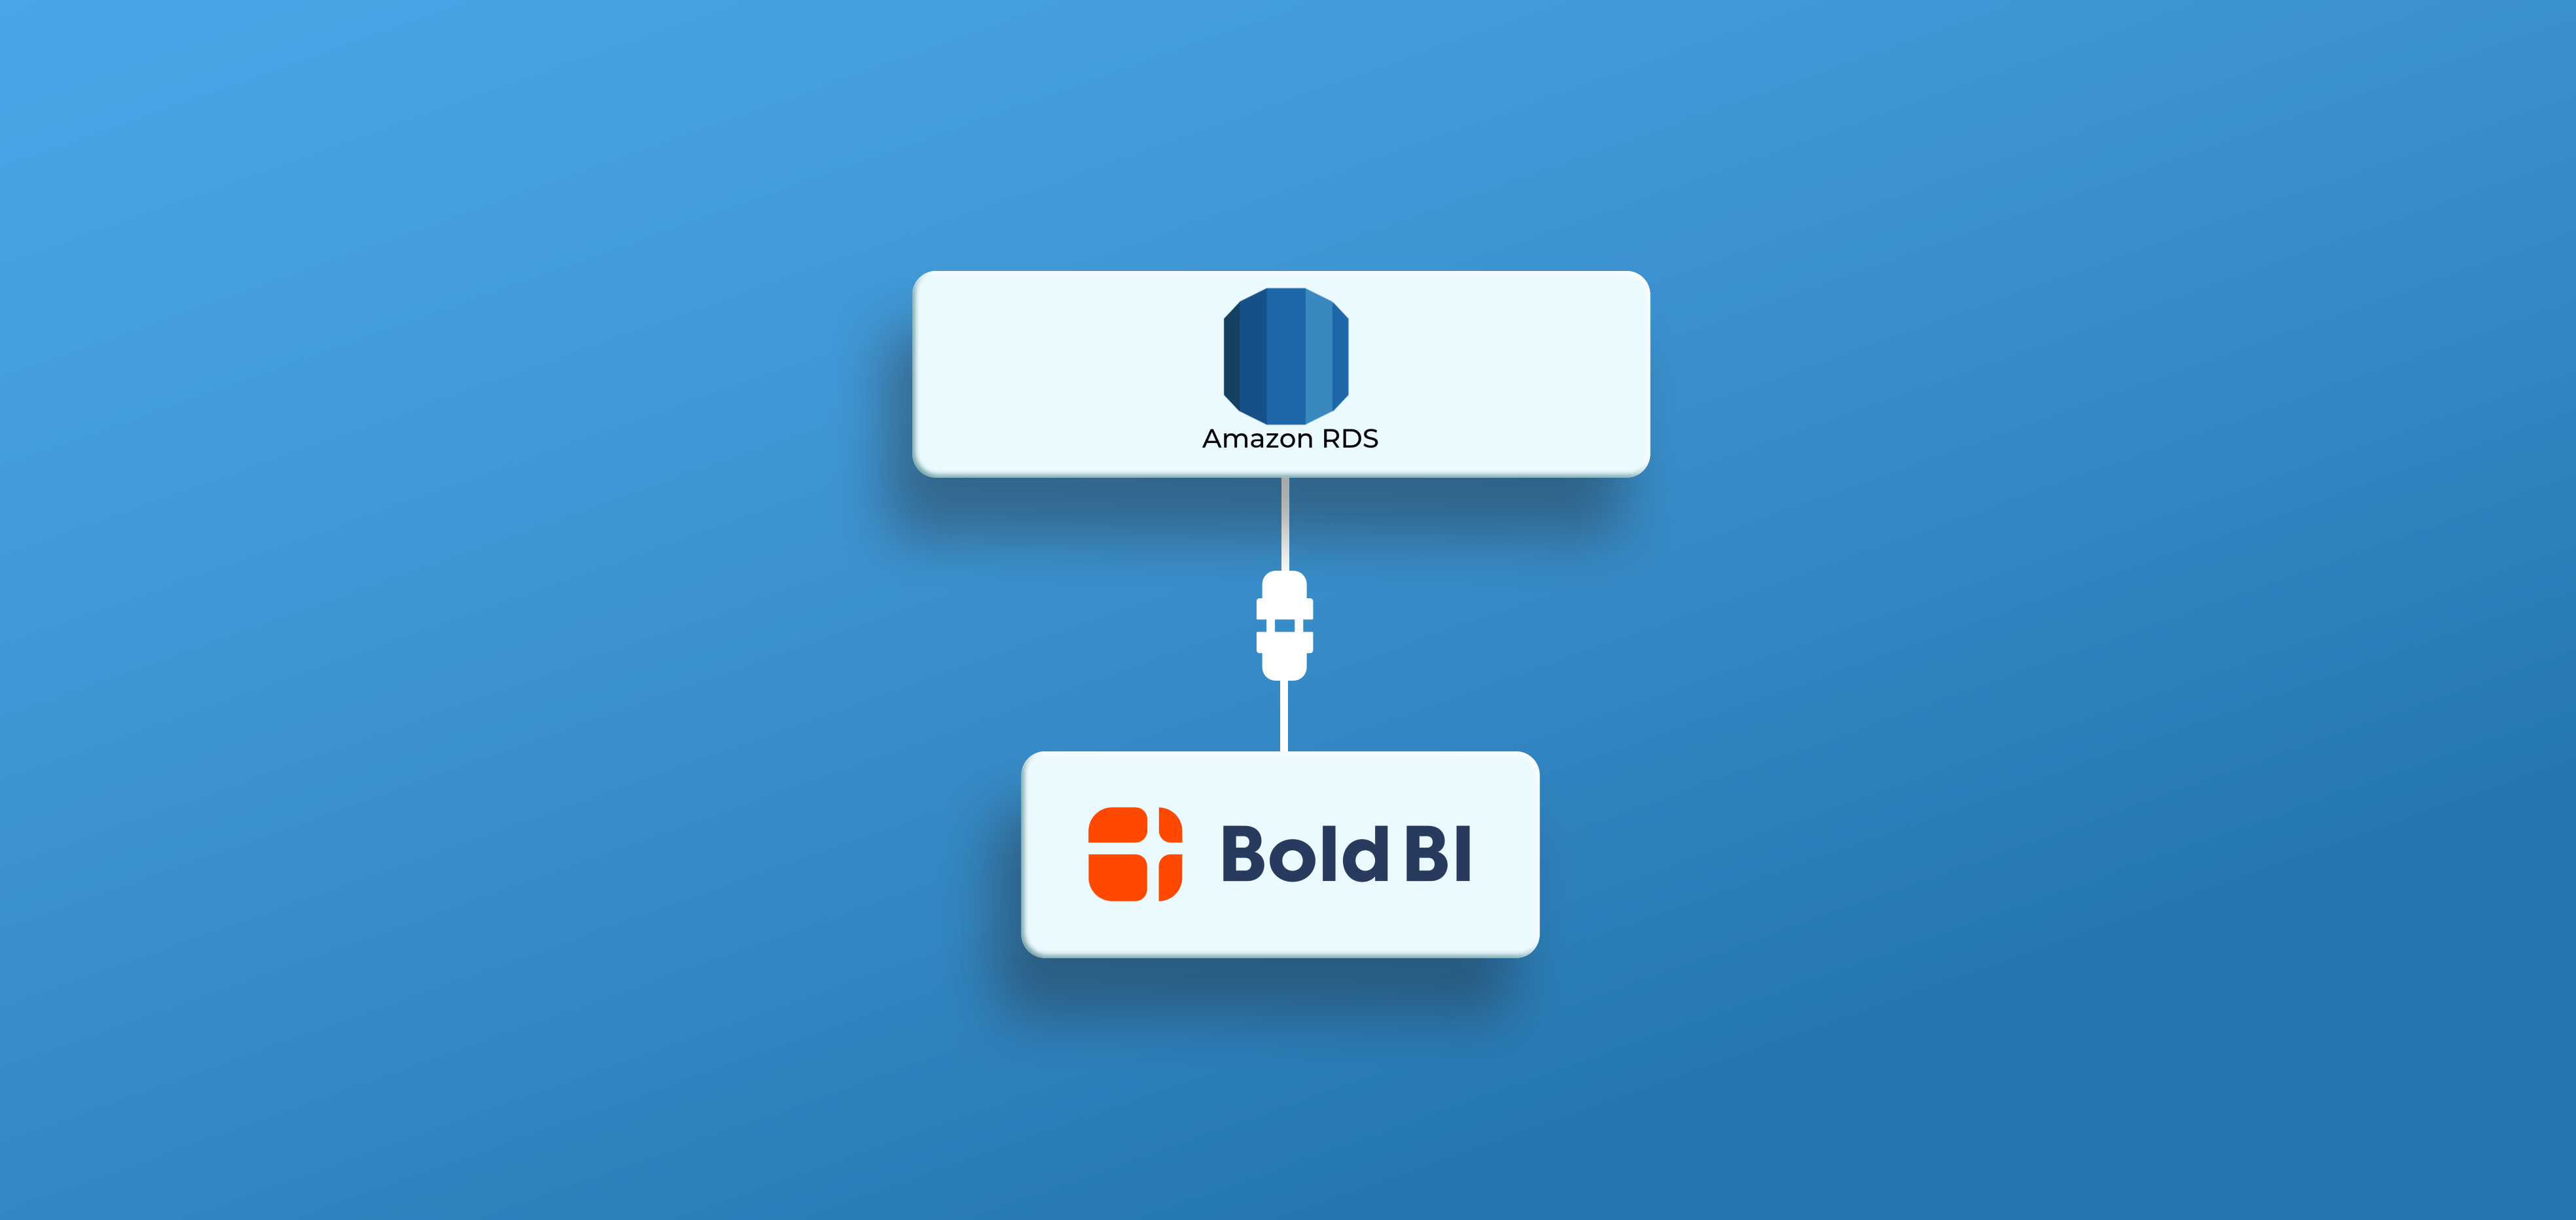 Connecting Bold BI to Amazon RDS data source